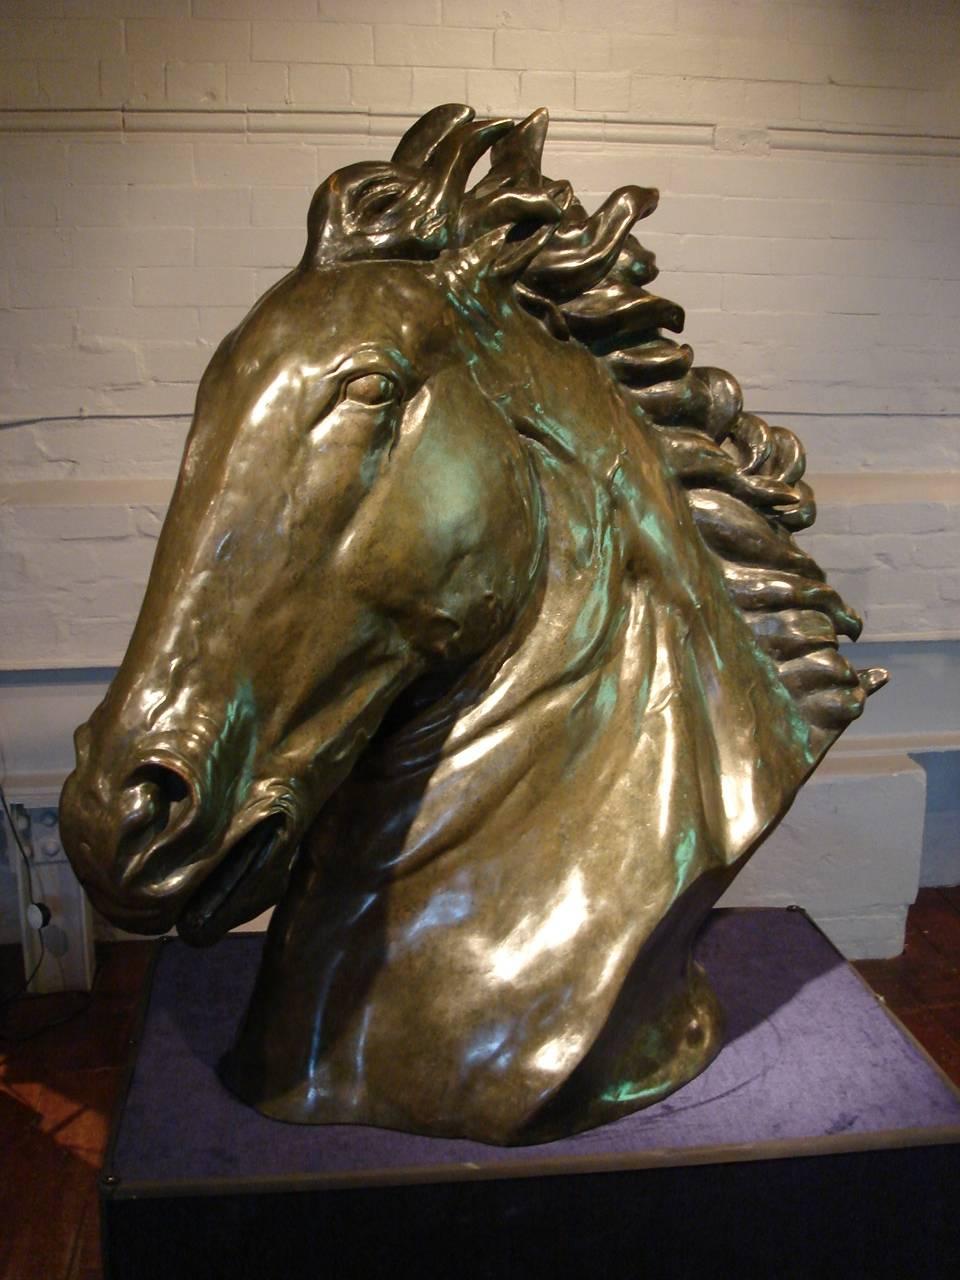 Croatian Contemporary Bronze Sculpture of a Life-Size Horse's Head by Dada For Sale